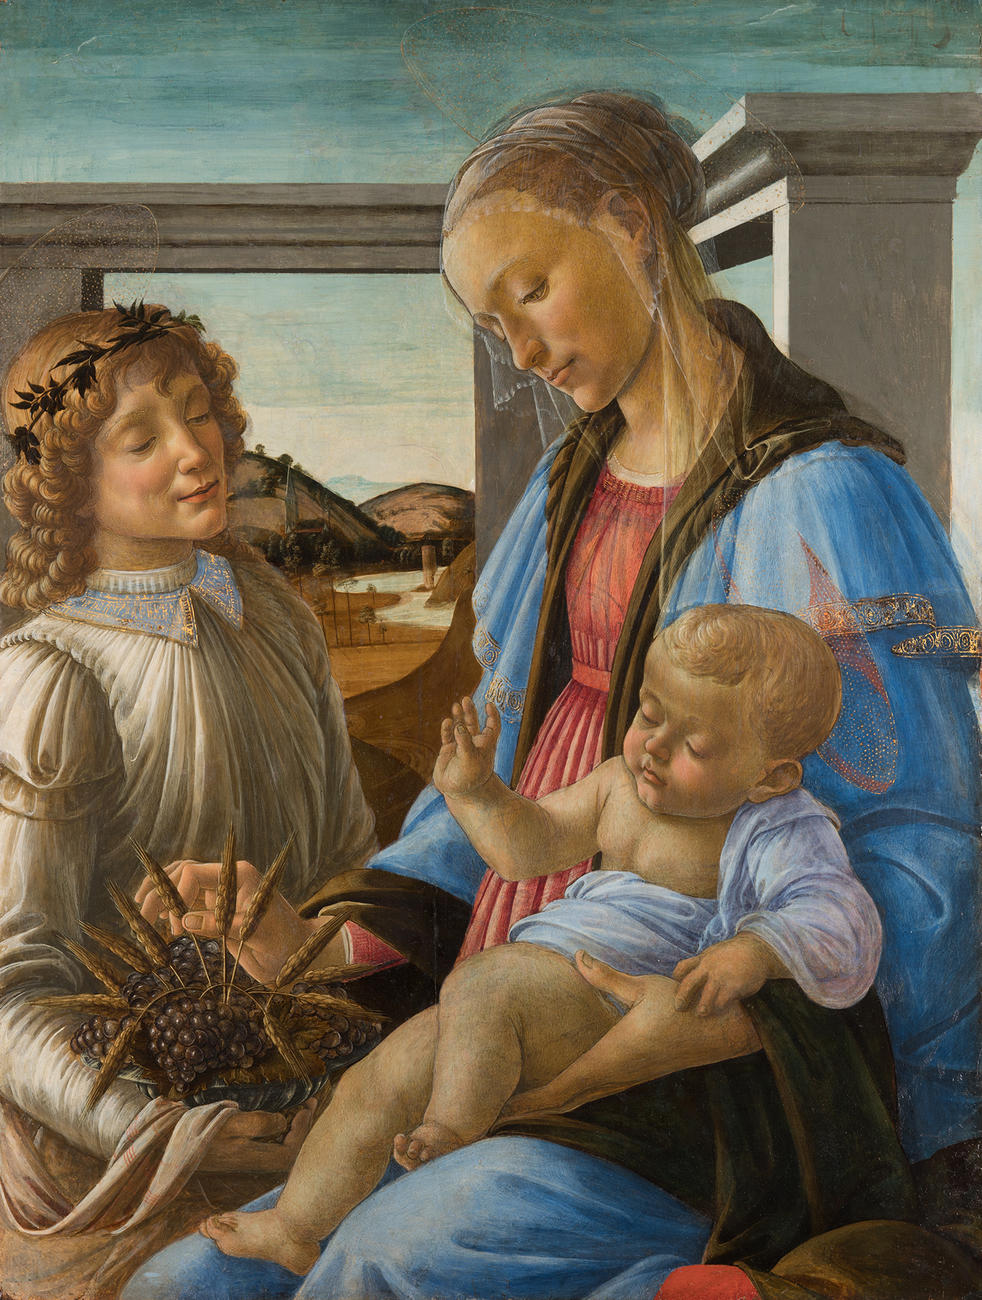 Boticelli’s painting Virgin and Child with an angel before the 2023 conservation treatment. A woman, the Virgin Mary, with a halo, veil, and wearing a blue robe holding an infant, the baby Jesus, in her lap. Standing to her left is a man, an angel, with a halo and wearing a white robe. He holds a pomegranate with sprigs of wheat. Behind them are white columns and a landscape.